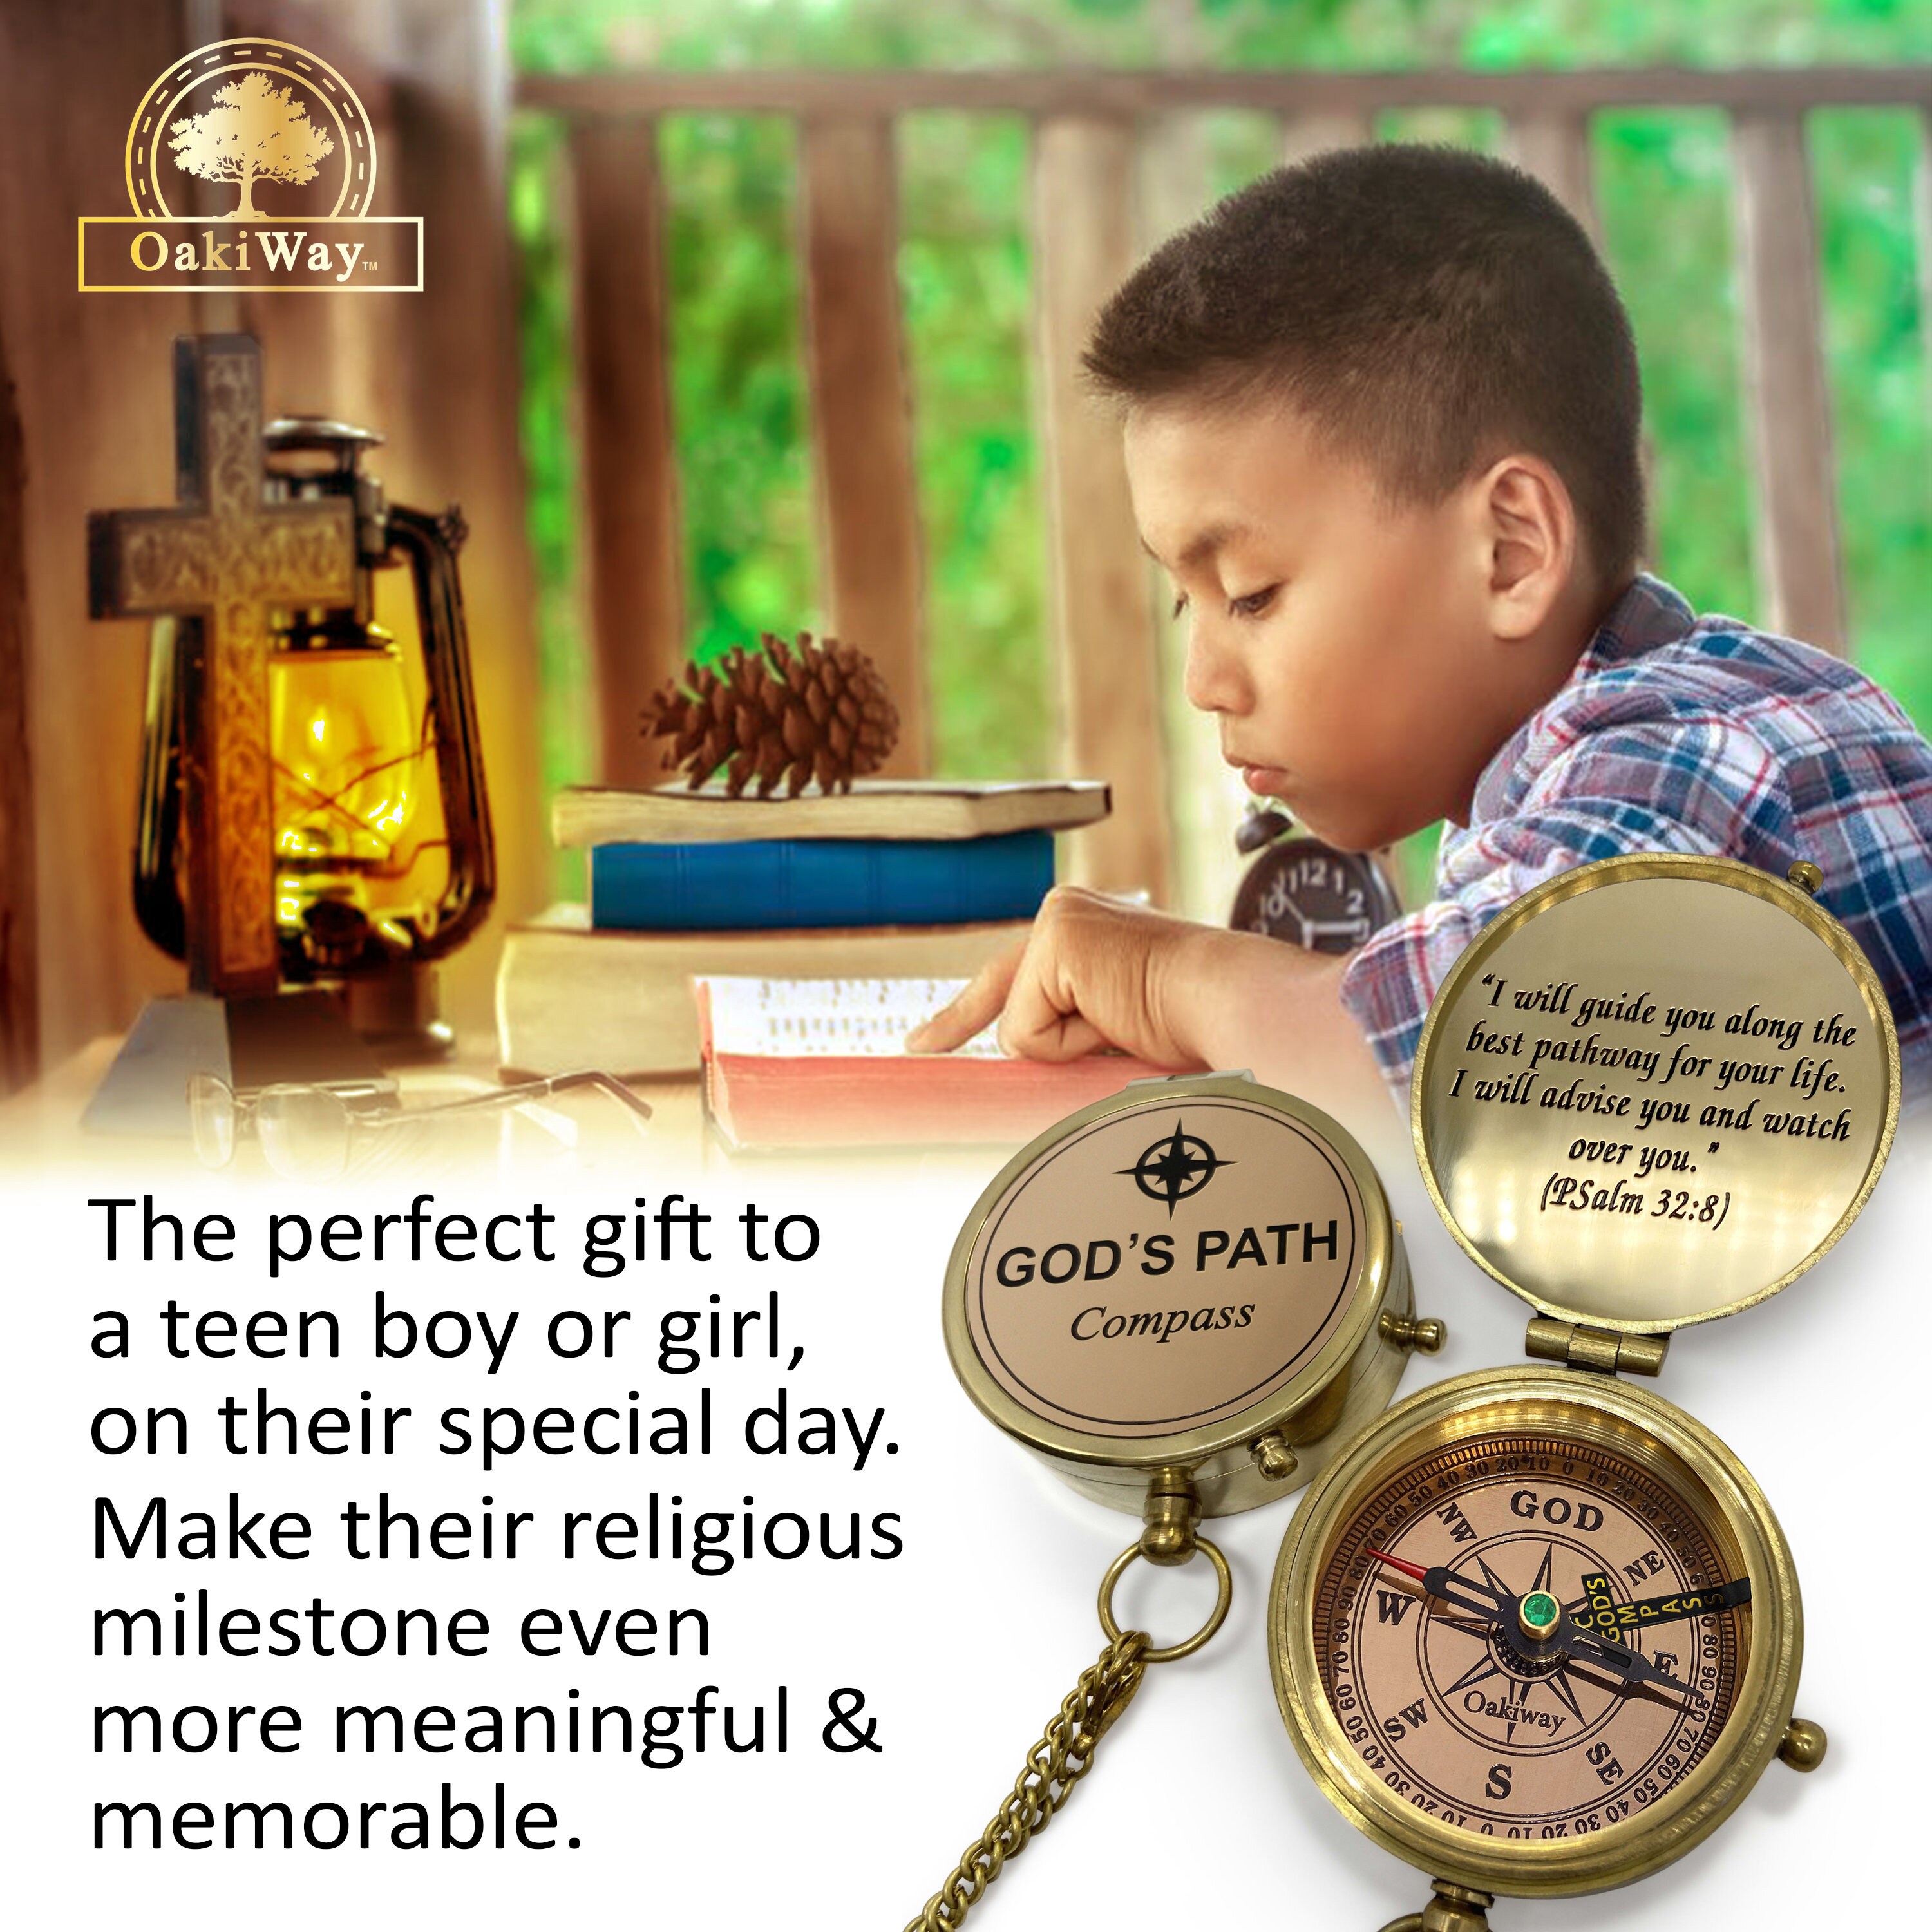 God's Providence Compass - Christian Gifts for Men, Catholic Gifts, Baptism  Gifts for Boys, Gifts for Teen Boys, Graduation Gifts, Inspirational Gifts